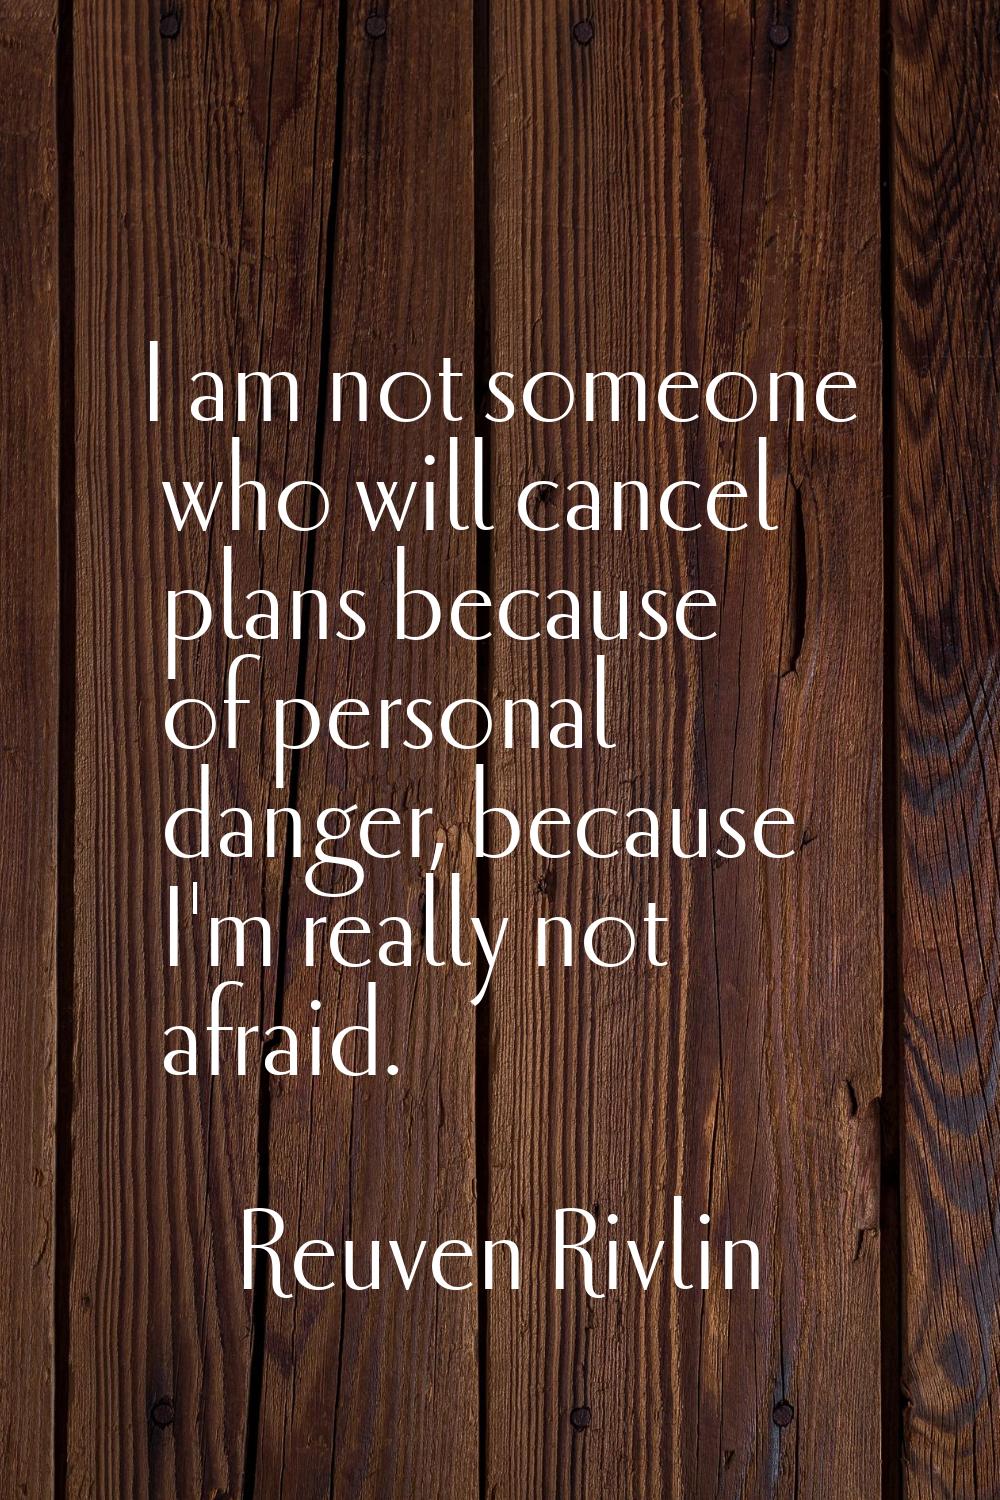 I am not someone who will cancel plans because of personal danger, because I'm really not afraid.